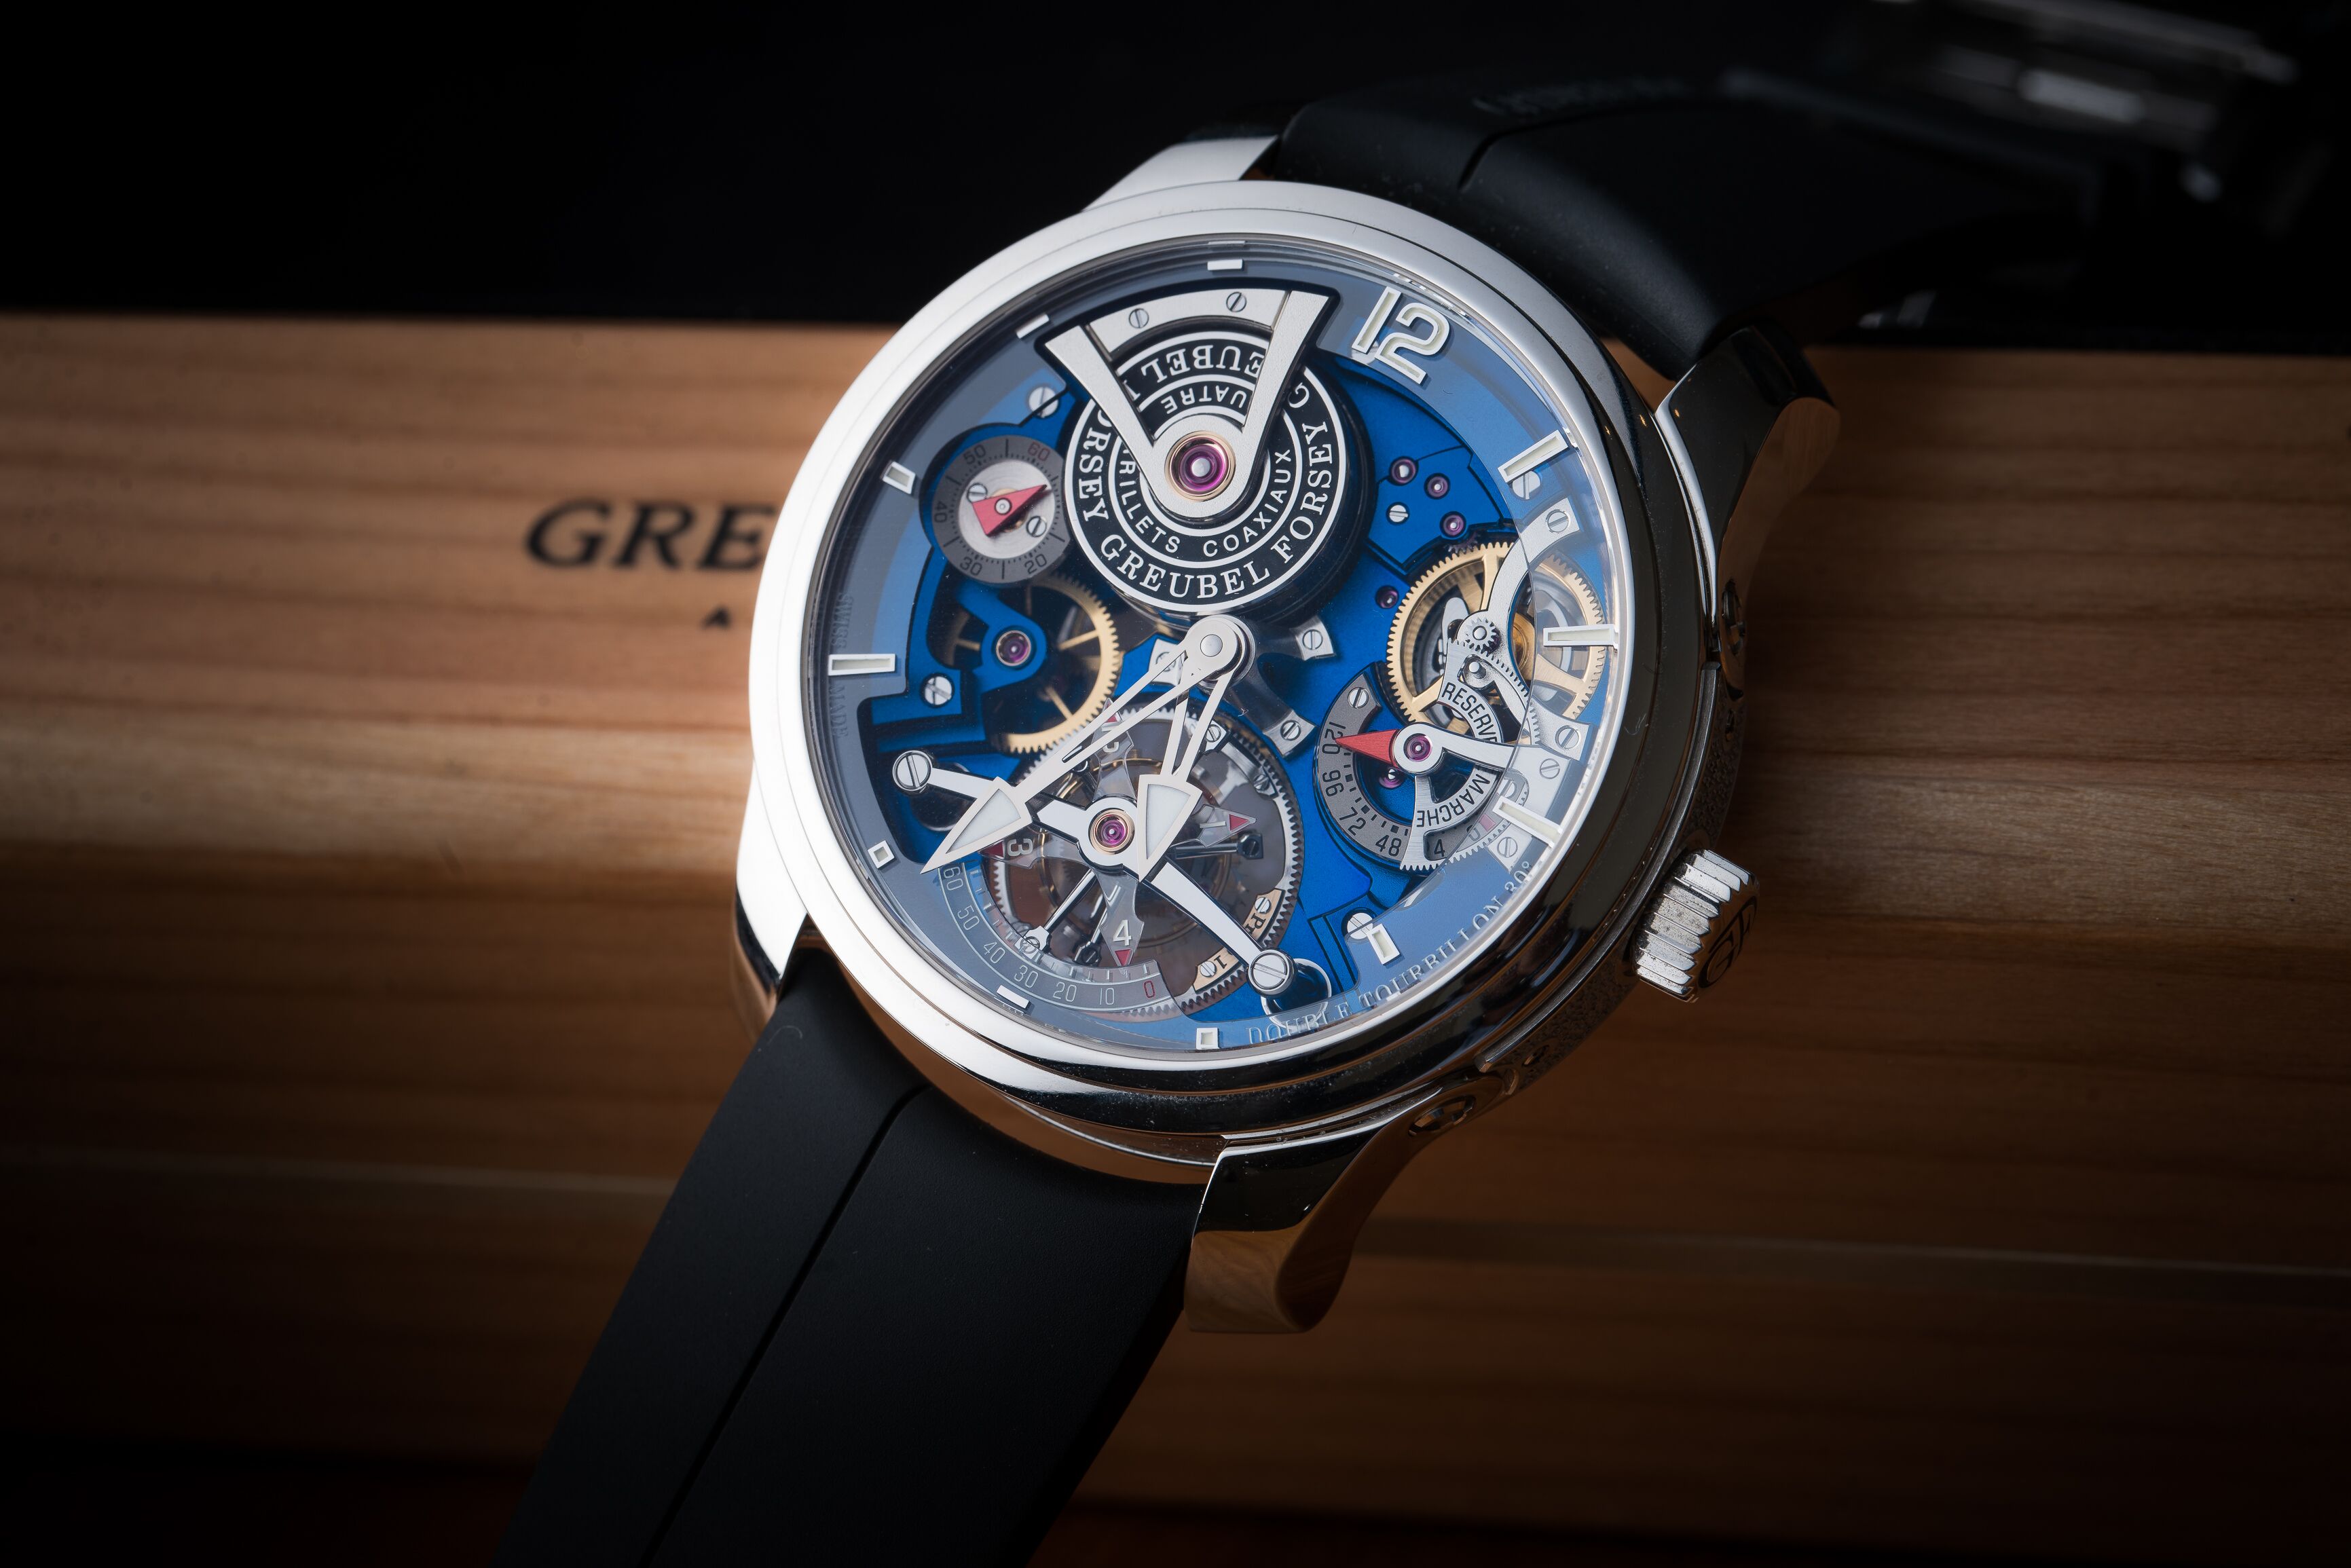 Why Greubel Forsey Went Through Double The Trouble For The Double Tourbillon 30°